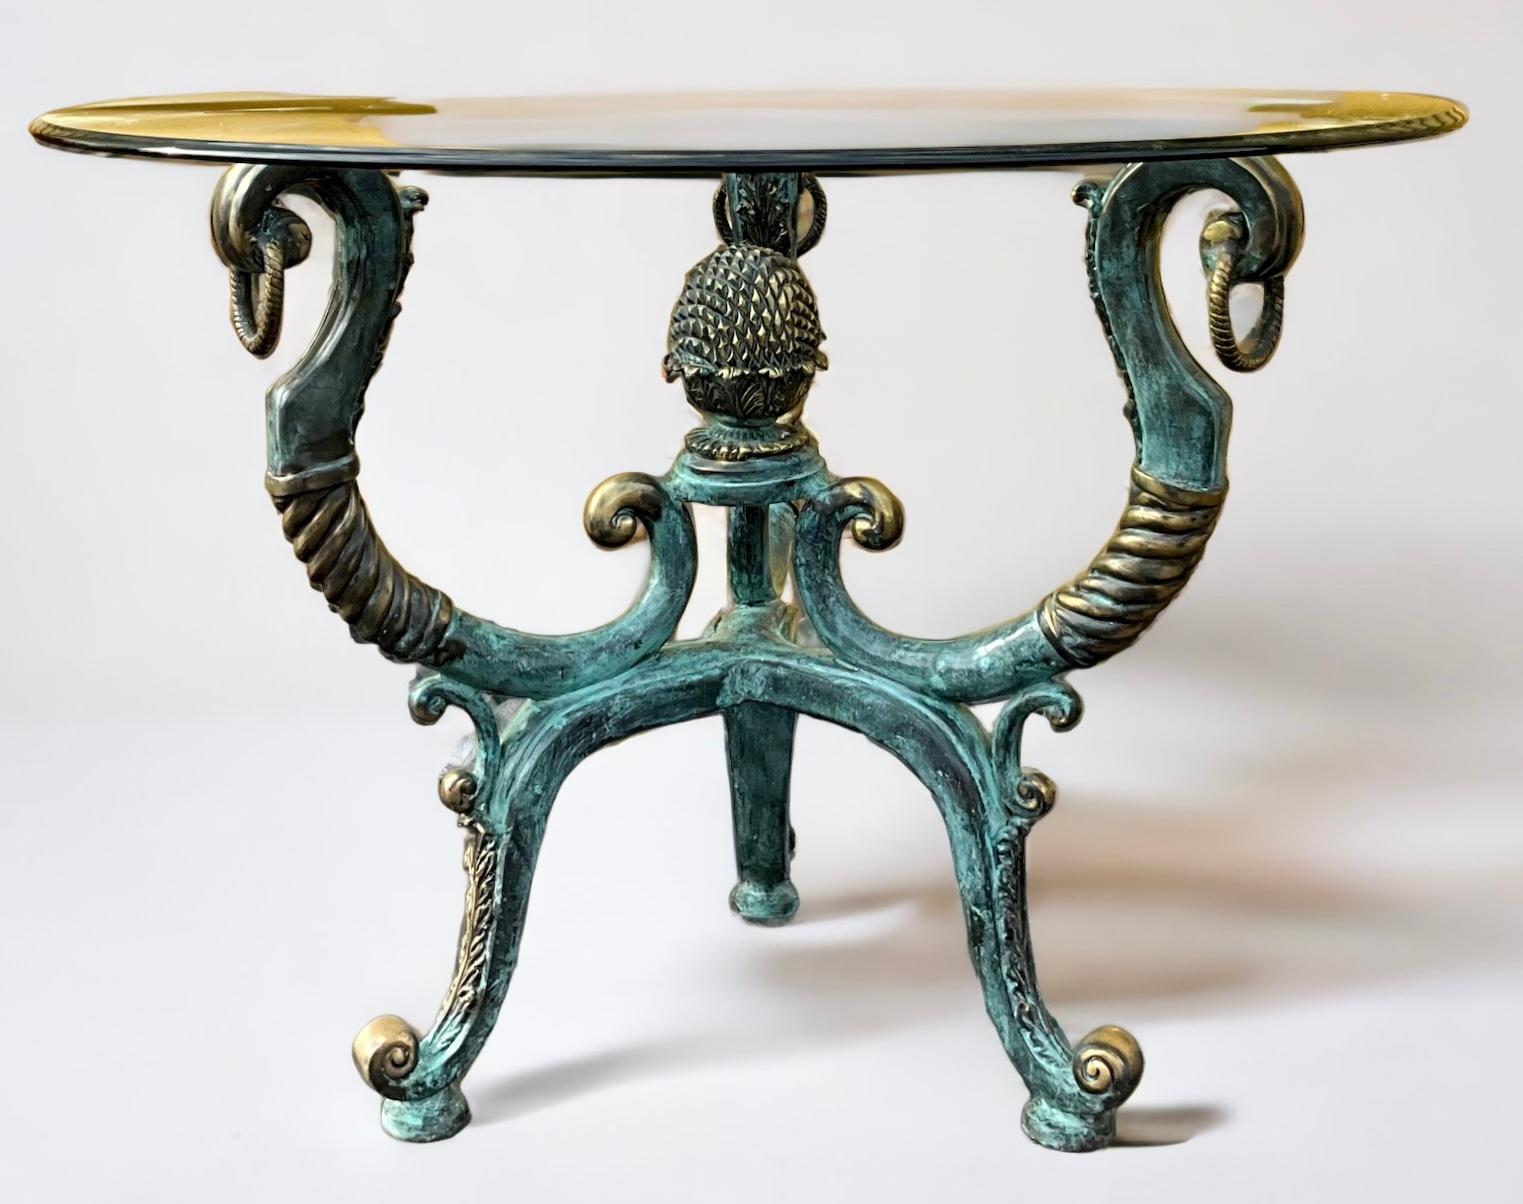 This is a neoclassical style patinated brass center table by LaBarge. The base is large enough to support a larger piece of glass. It is in very good condition. LaBarge pieces were typically Italian.